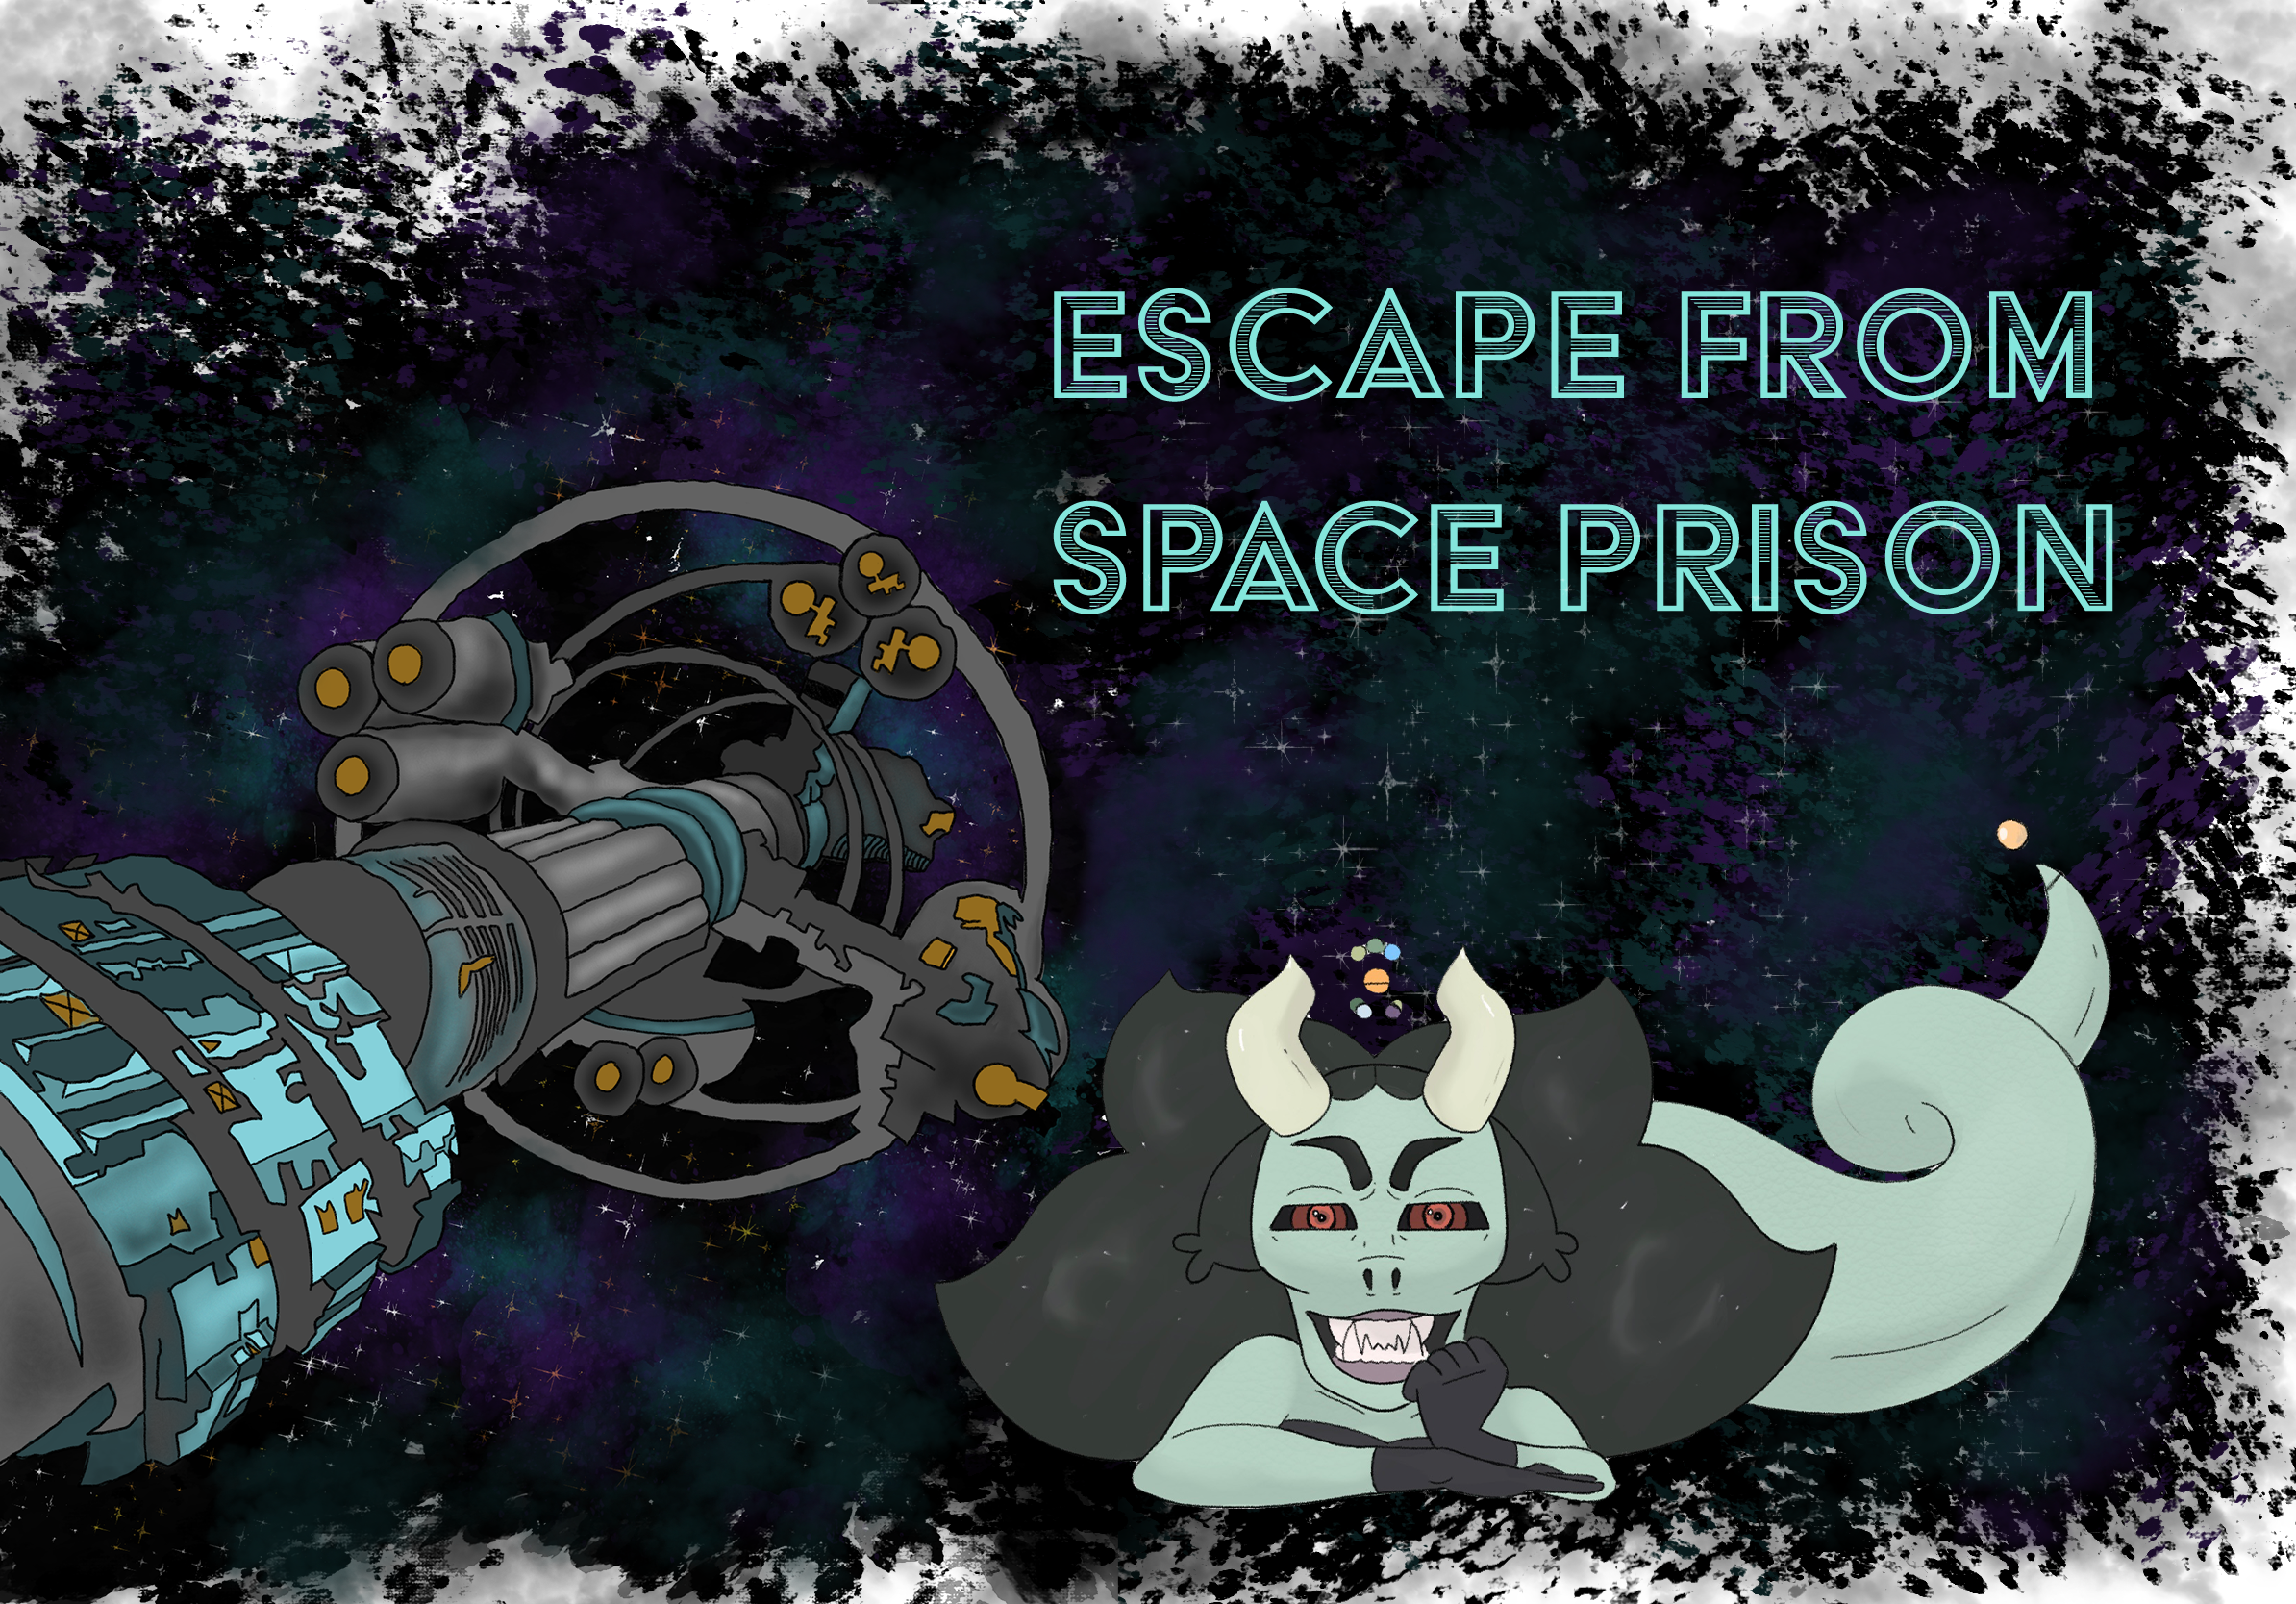 Escape from Space Prison banner - a spaceship behind an evil snakelike creature floating in space